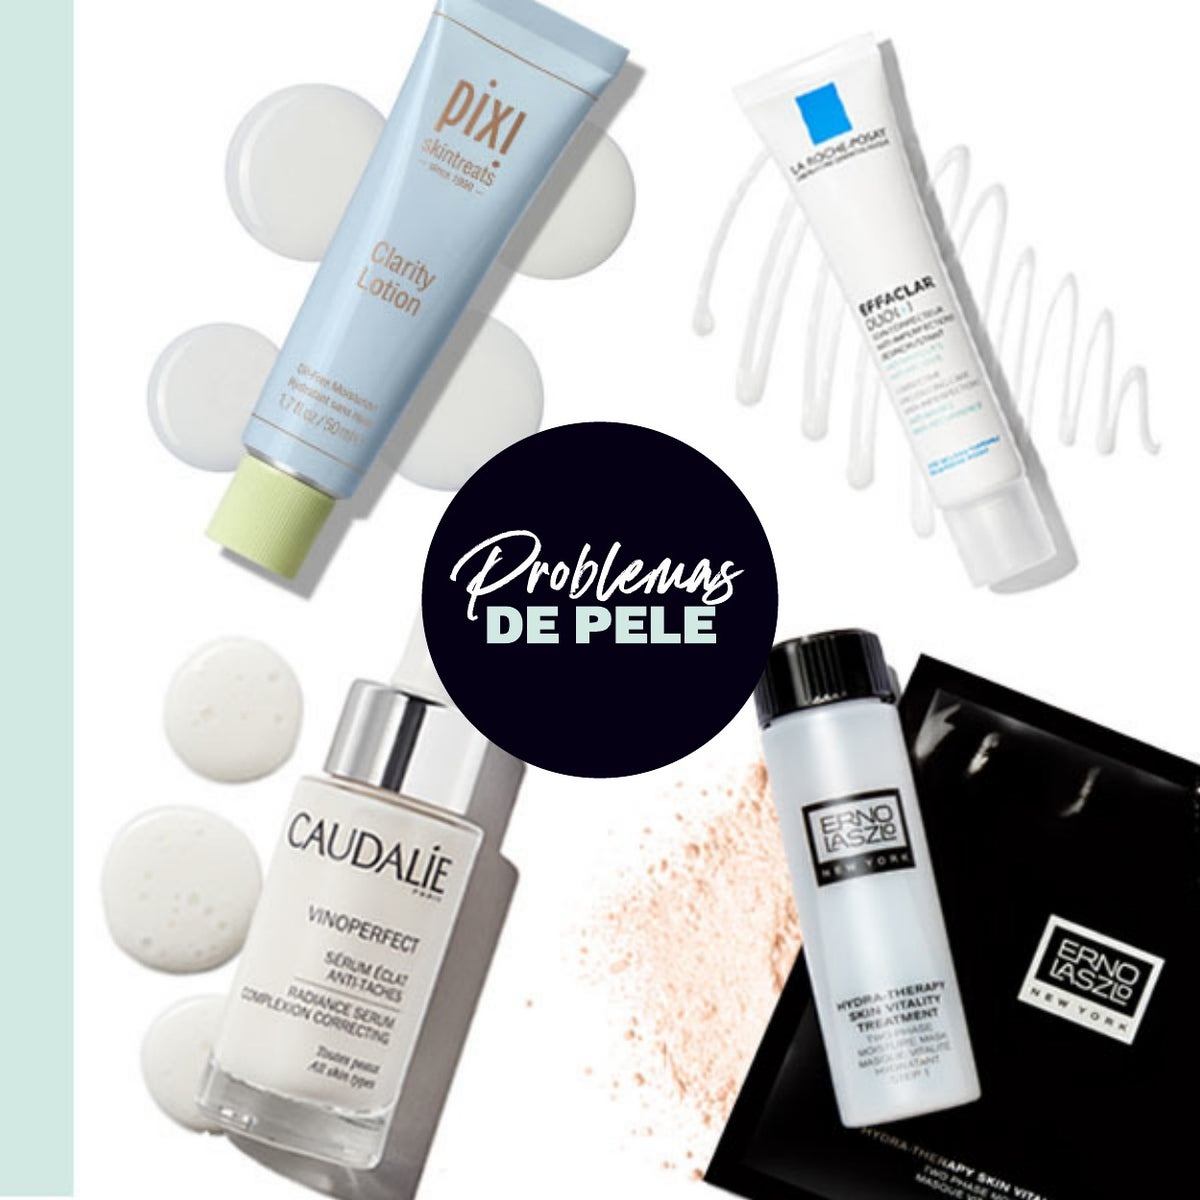 Shop by skincare concern to get the best skincare products for you!